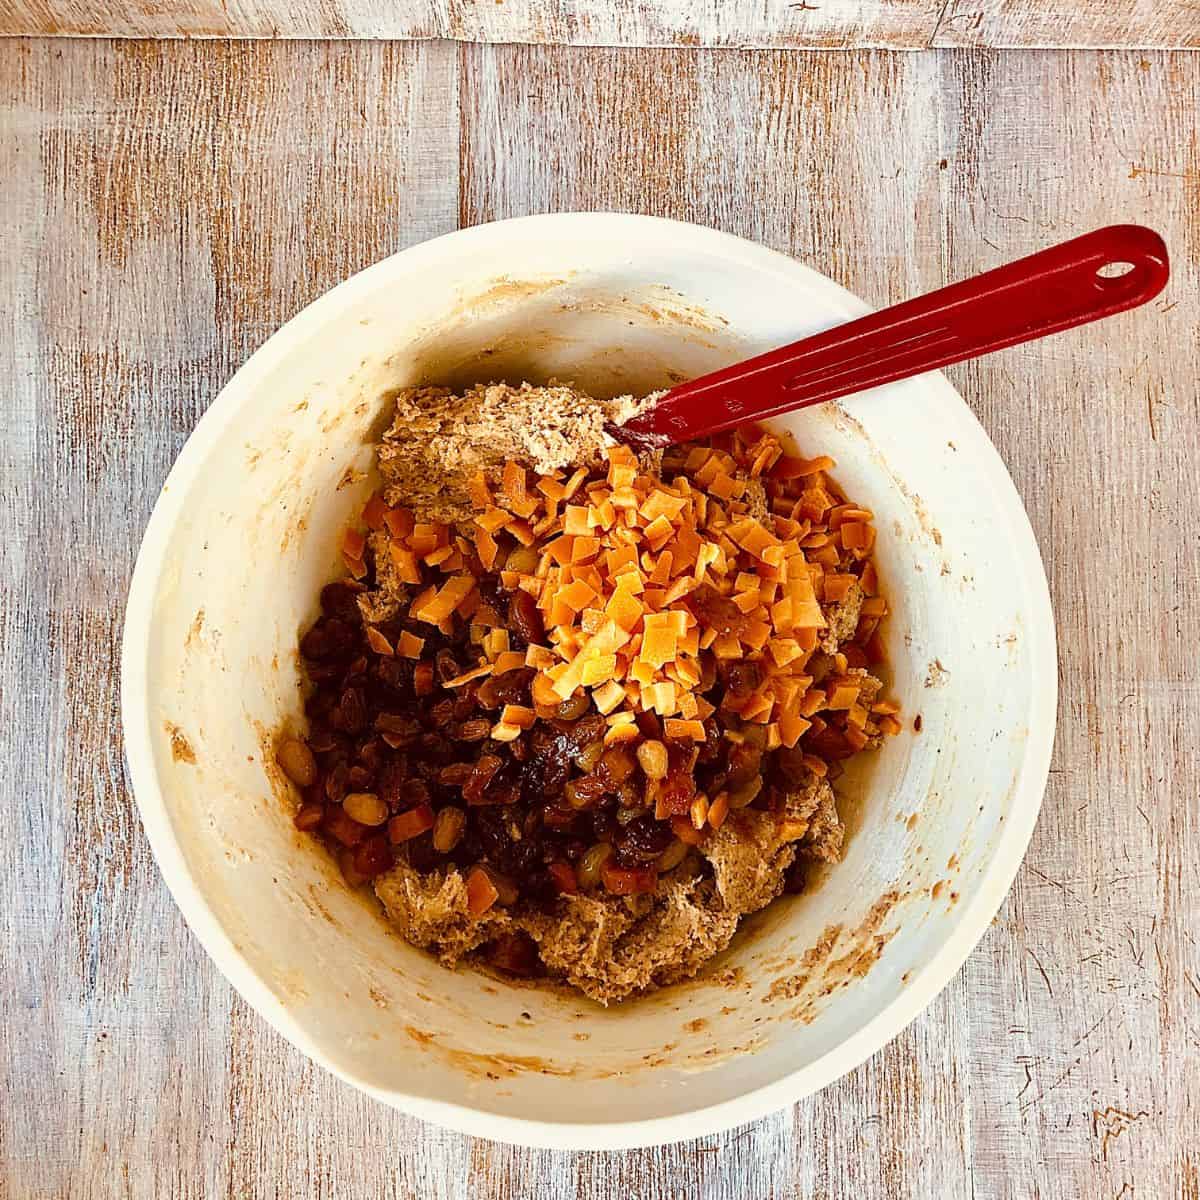 Vegan Christmas cake dough mix in a bowl with chopped alcohol-soaked dried fruit and chopped candied orange added, ready to mix.